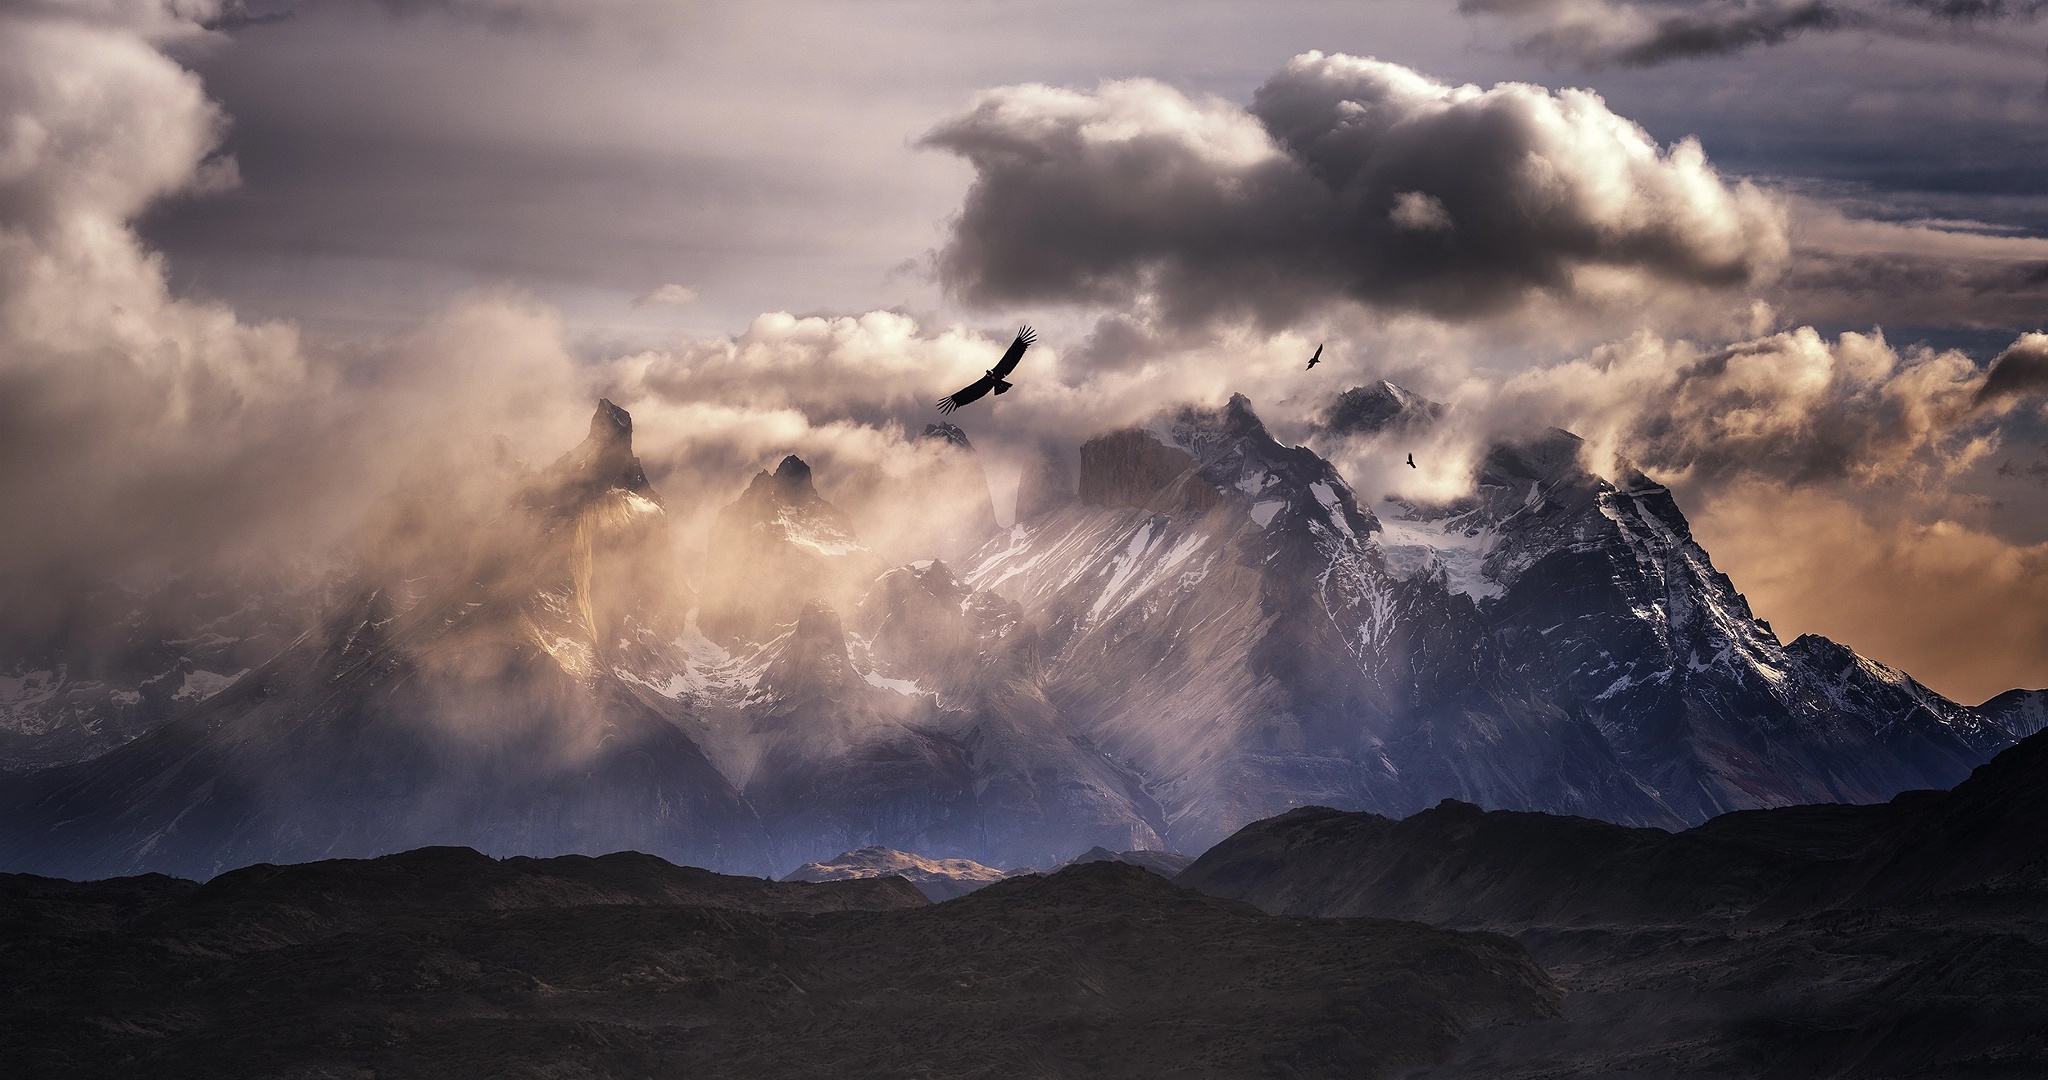 General 2048x1080 South America mountains nature birds sky clouds